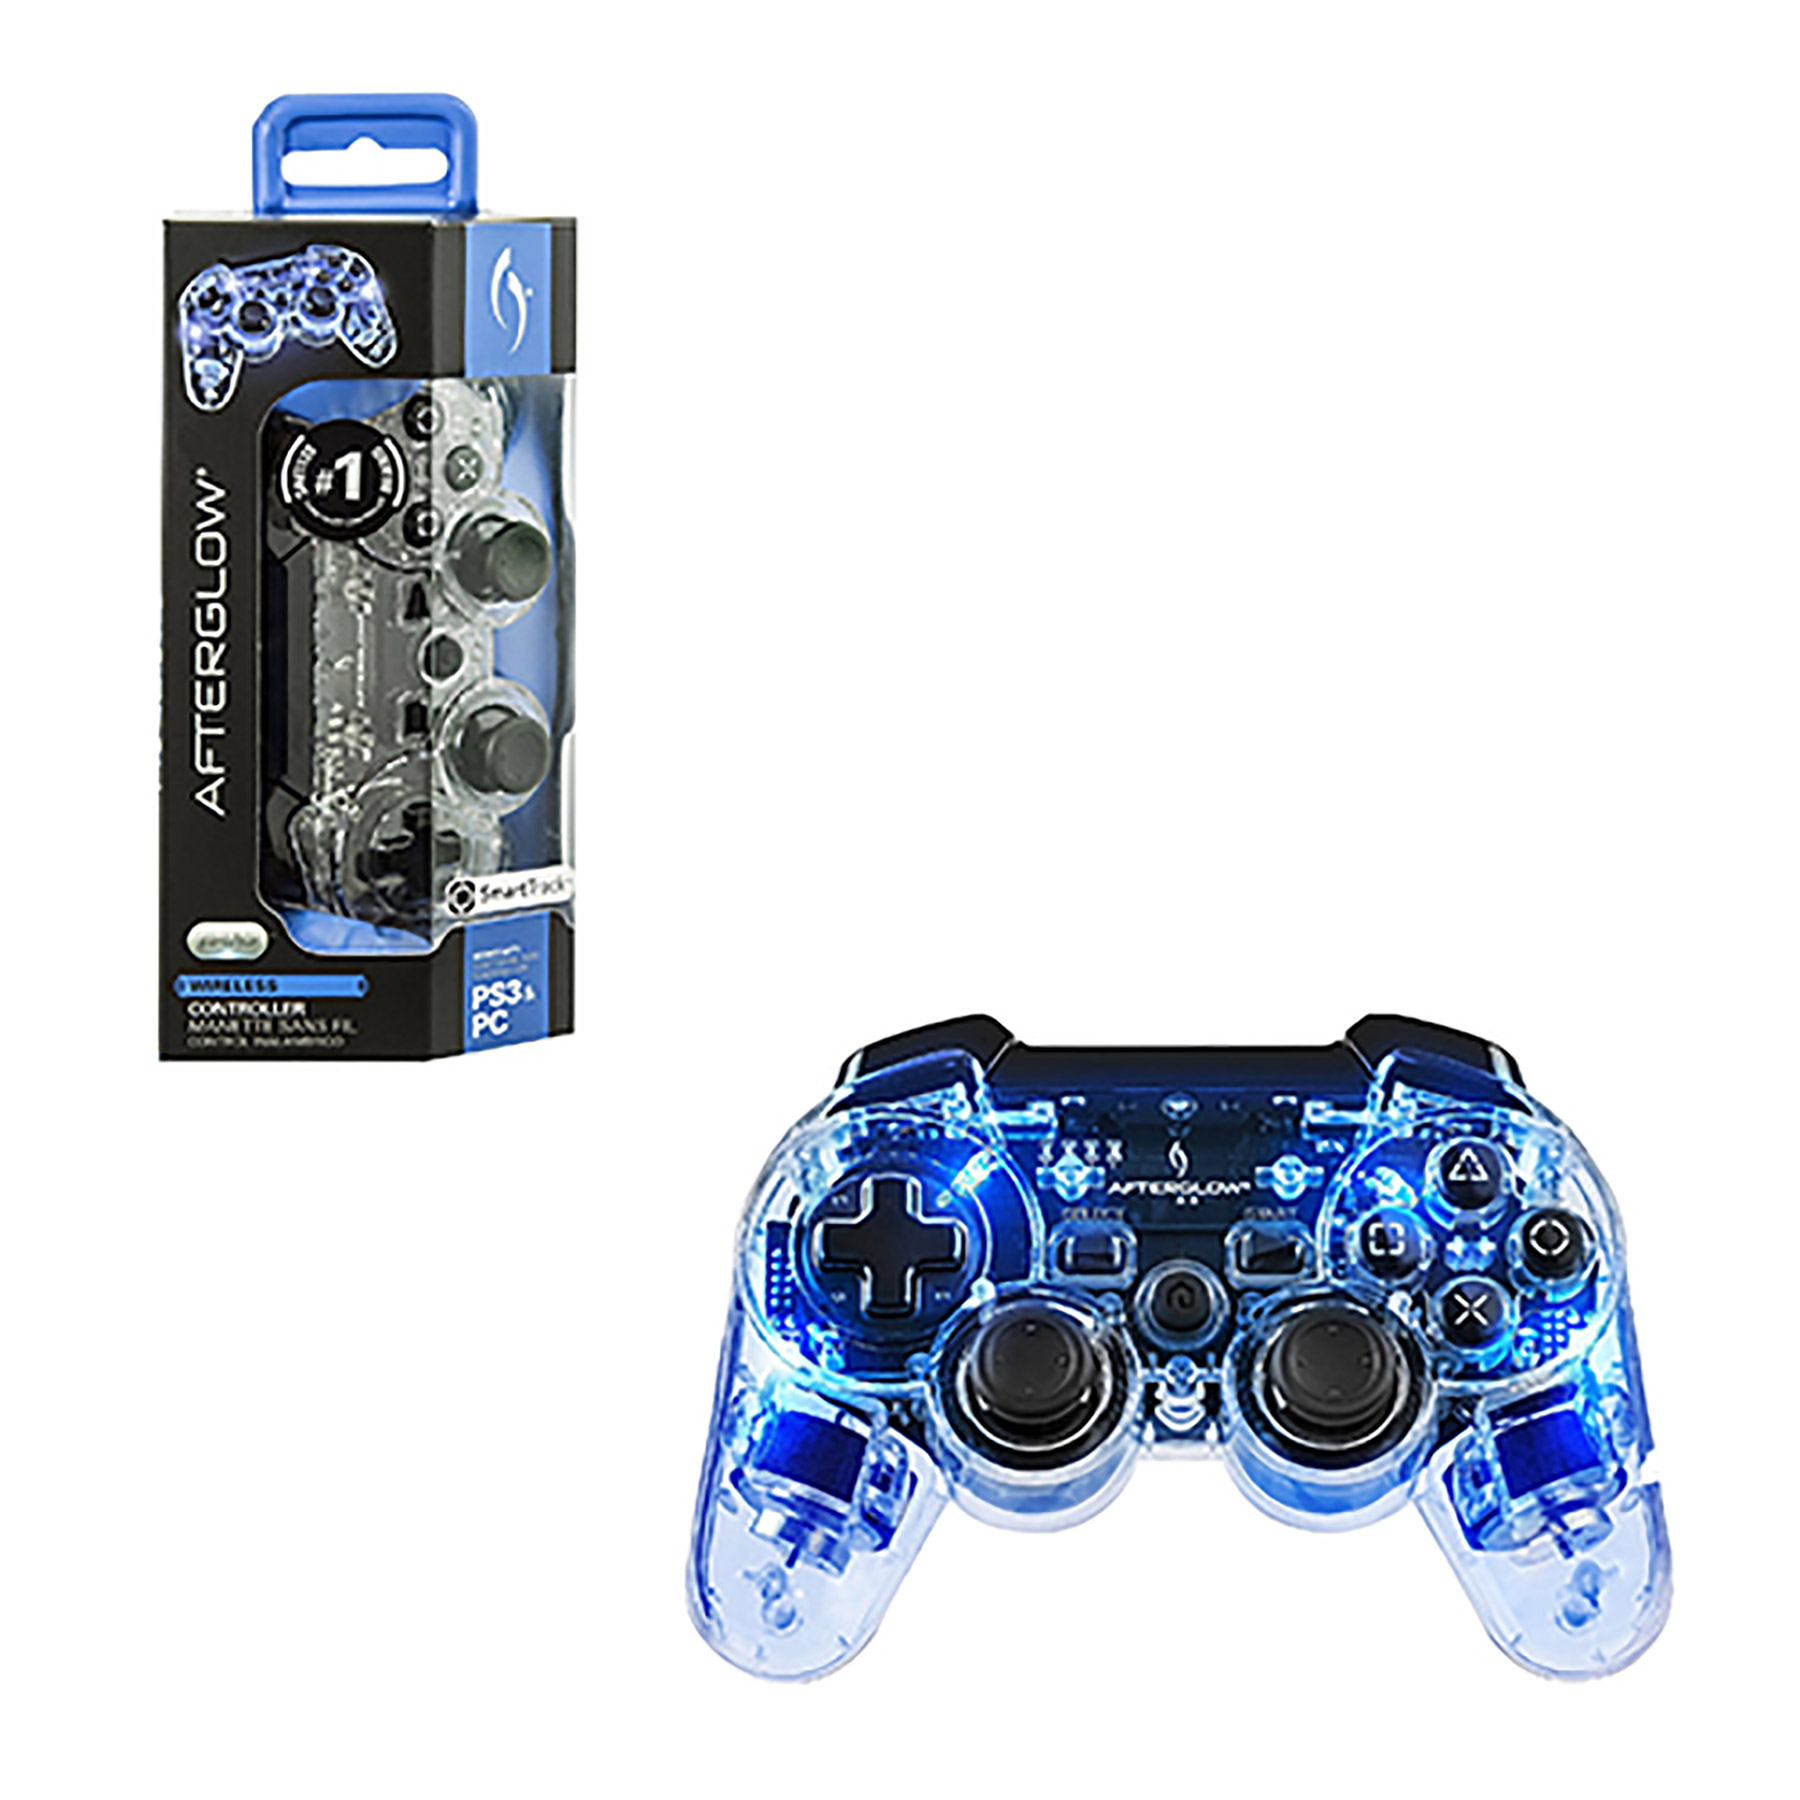 can you use afterglow ps3 controller on ps4